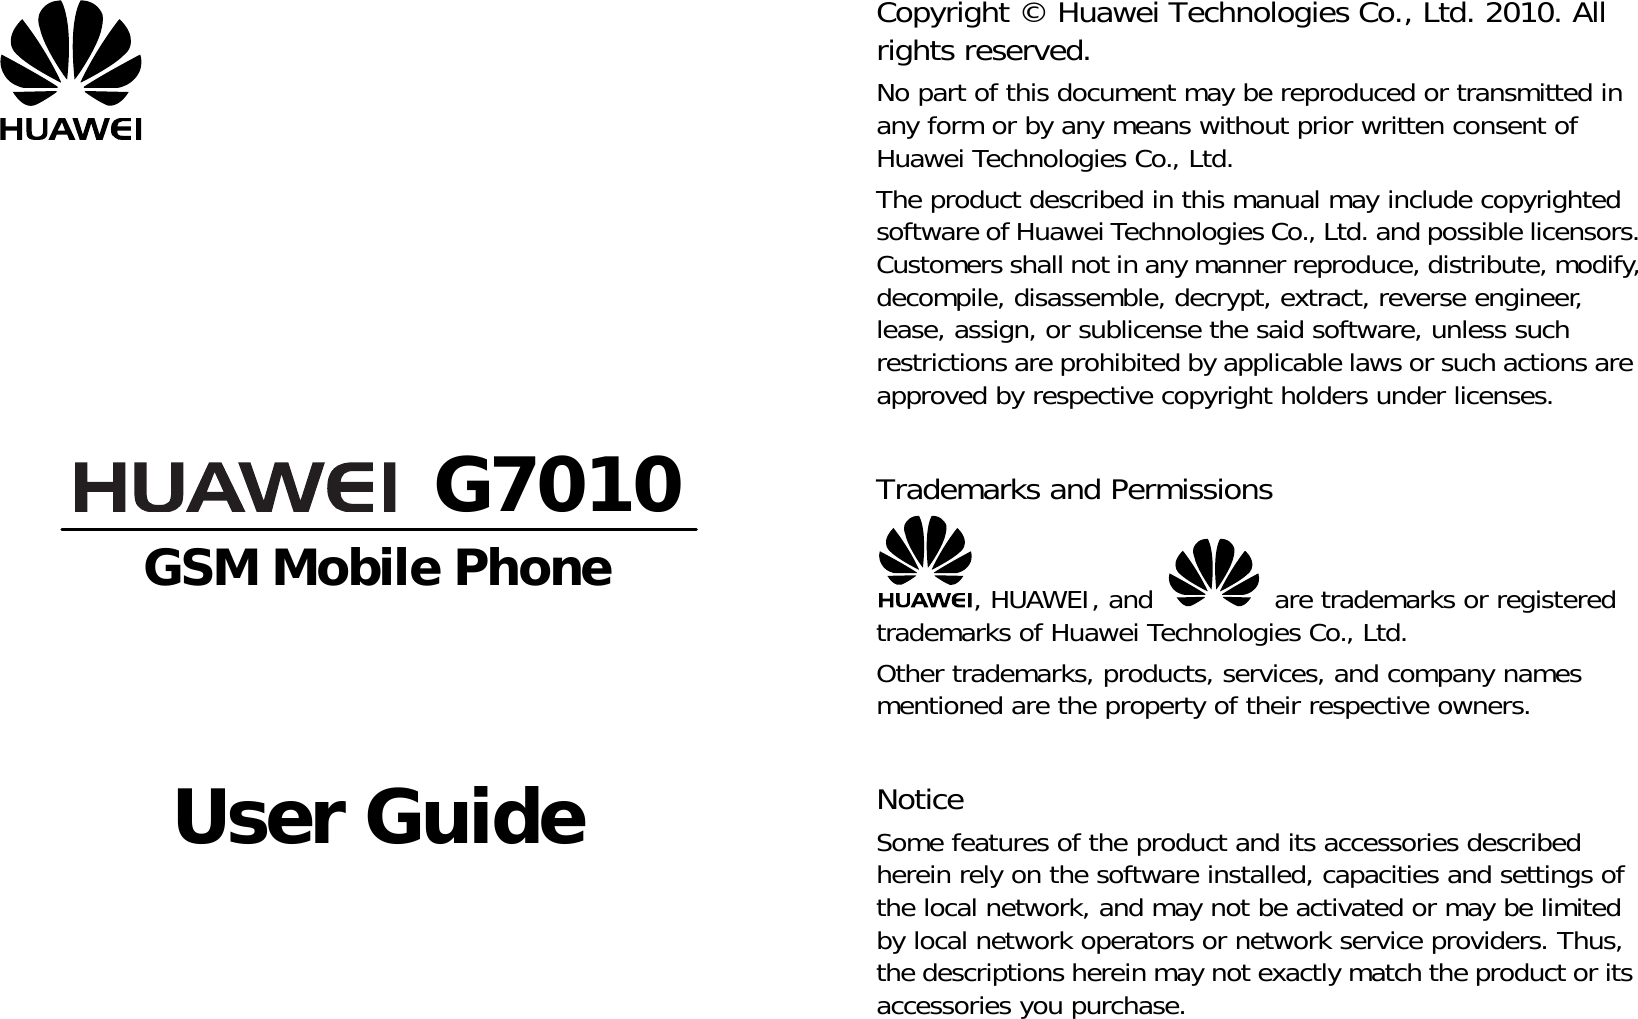          G7010 GSM Mobile Phone     User Guide       Copyright © Huawei Technologies Co., Ltd. 2010. All rights reserved. No part of this document may be reproduced or transmitted in any form or by any means without prior written consent of Huawei Technologies Co., Ltd. The product described in this manual may include copyrighted software of Huawei Technologies Co., Ltd. and possible licensors. Customers shall not in any manner reproduce, distribute, modify, decompile, disassemble, decrypt, extract, reverse engineer, lease, assign, or sublicense the said software, unless such restrictions are prohibited by applicable laws or such actions are approved by respective copyright holders under licenses.  Trademarks and Permissions , HUAWEI, and   are trademarks or registered trademarks of Huawei Technologies Co., Ltd. Other trademarks, products, services, and company names mentioned are the property of their respective owners.  Notice Some features of the product and its accessories described herein rely on the software installed, capacities and settings of the local network, and may not be activated or may be limited by local network operators or network service providers. Thus, the descriptions herein may not exactly match the product or its accessories you purchase. 